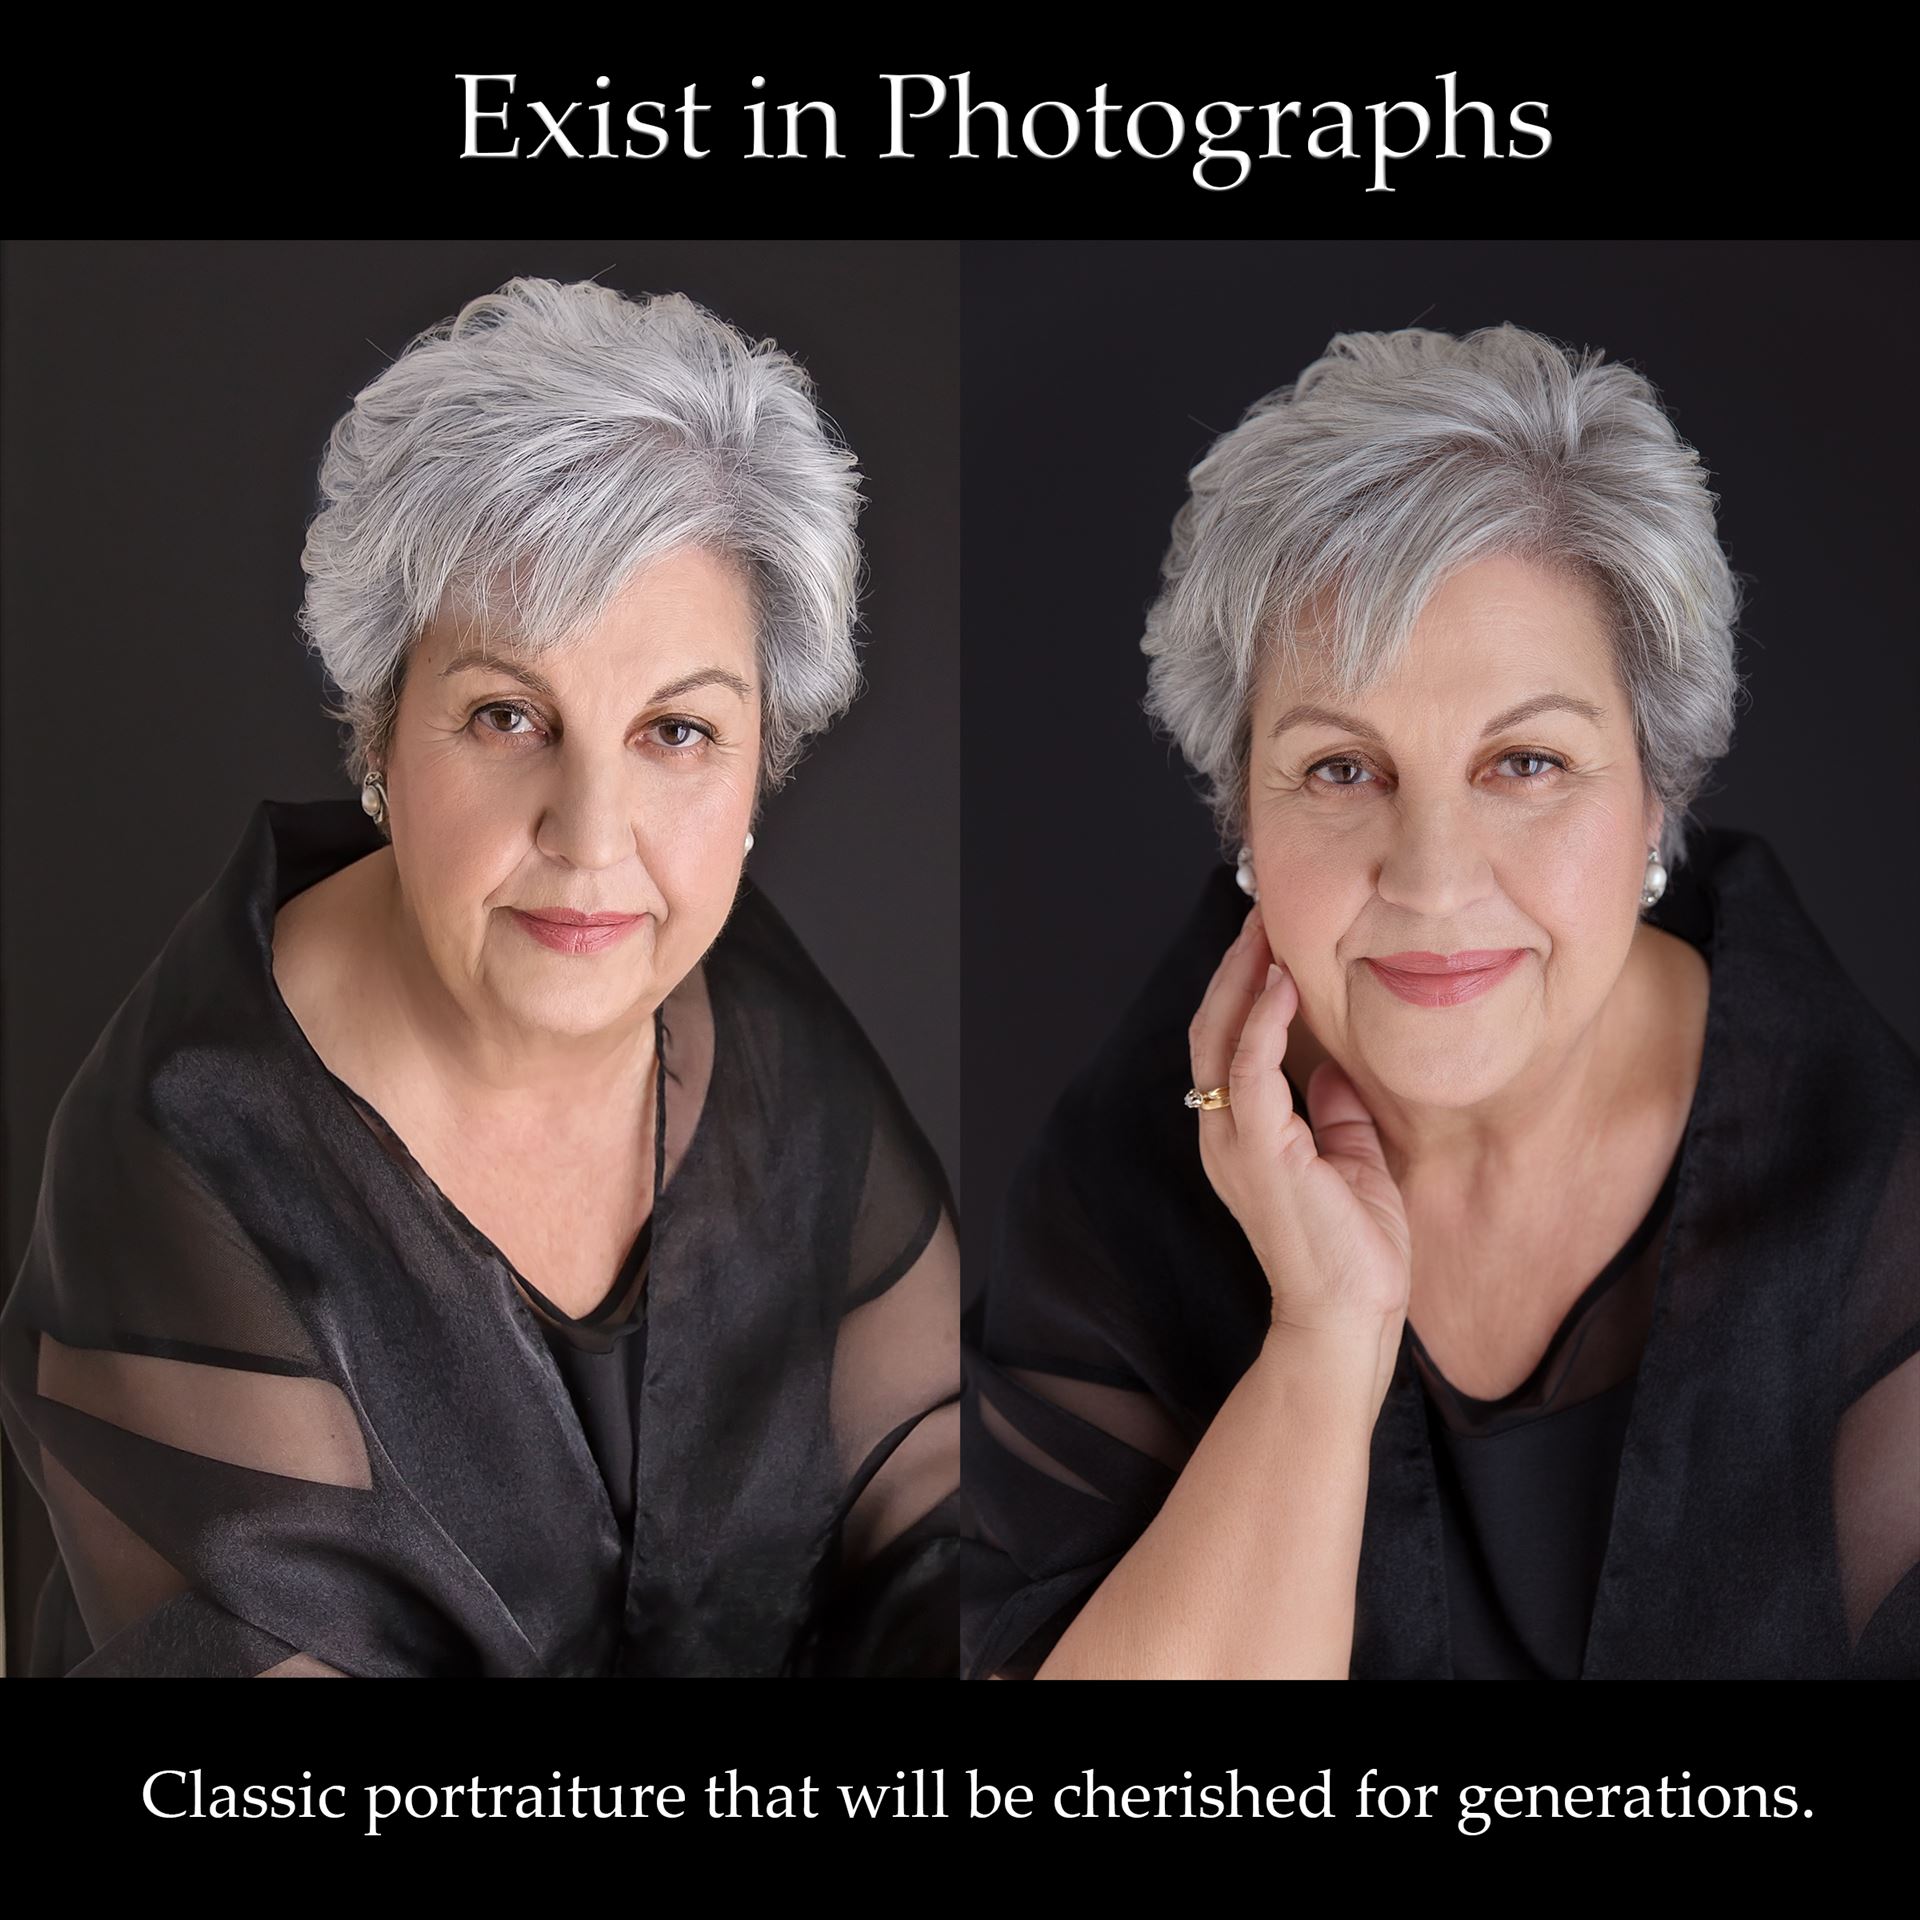 Exist-in-Photographs.jpg - beauty portraits, beauty, portrait, headshot, personal branding by Maria Angelopoulos Photogrpahy